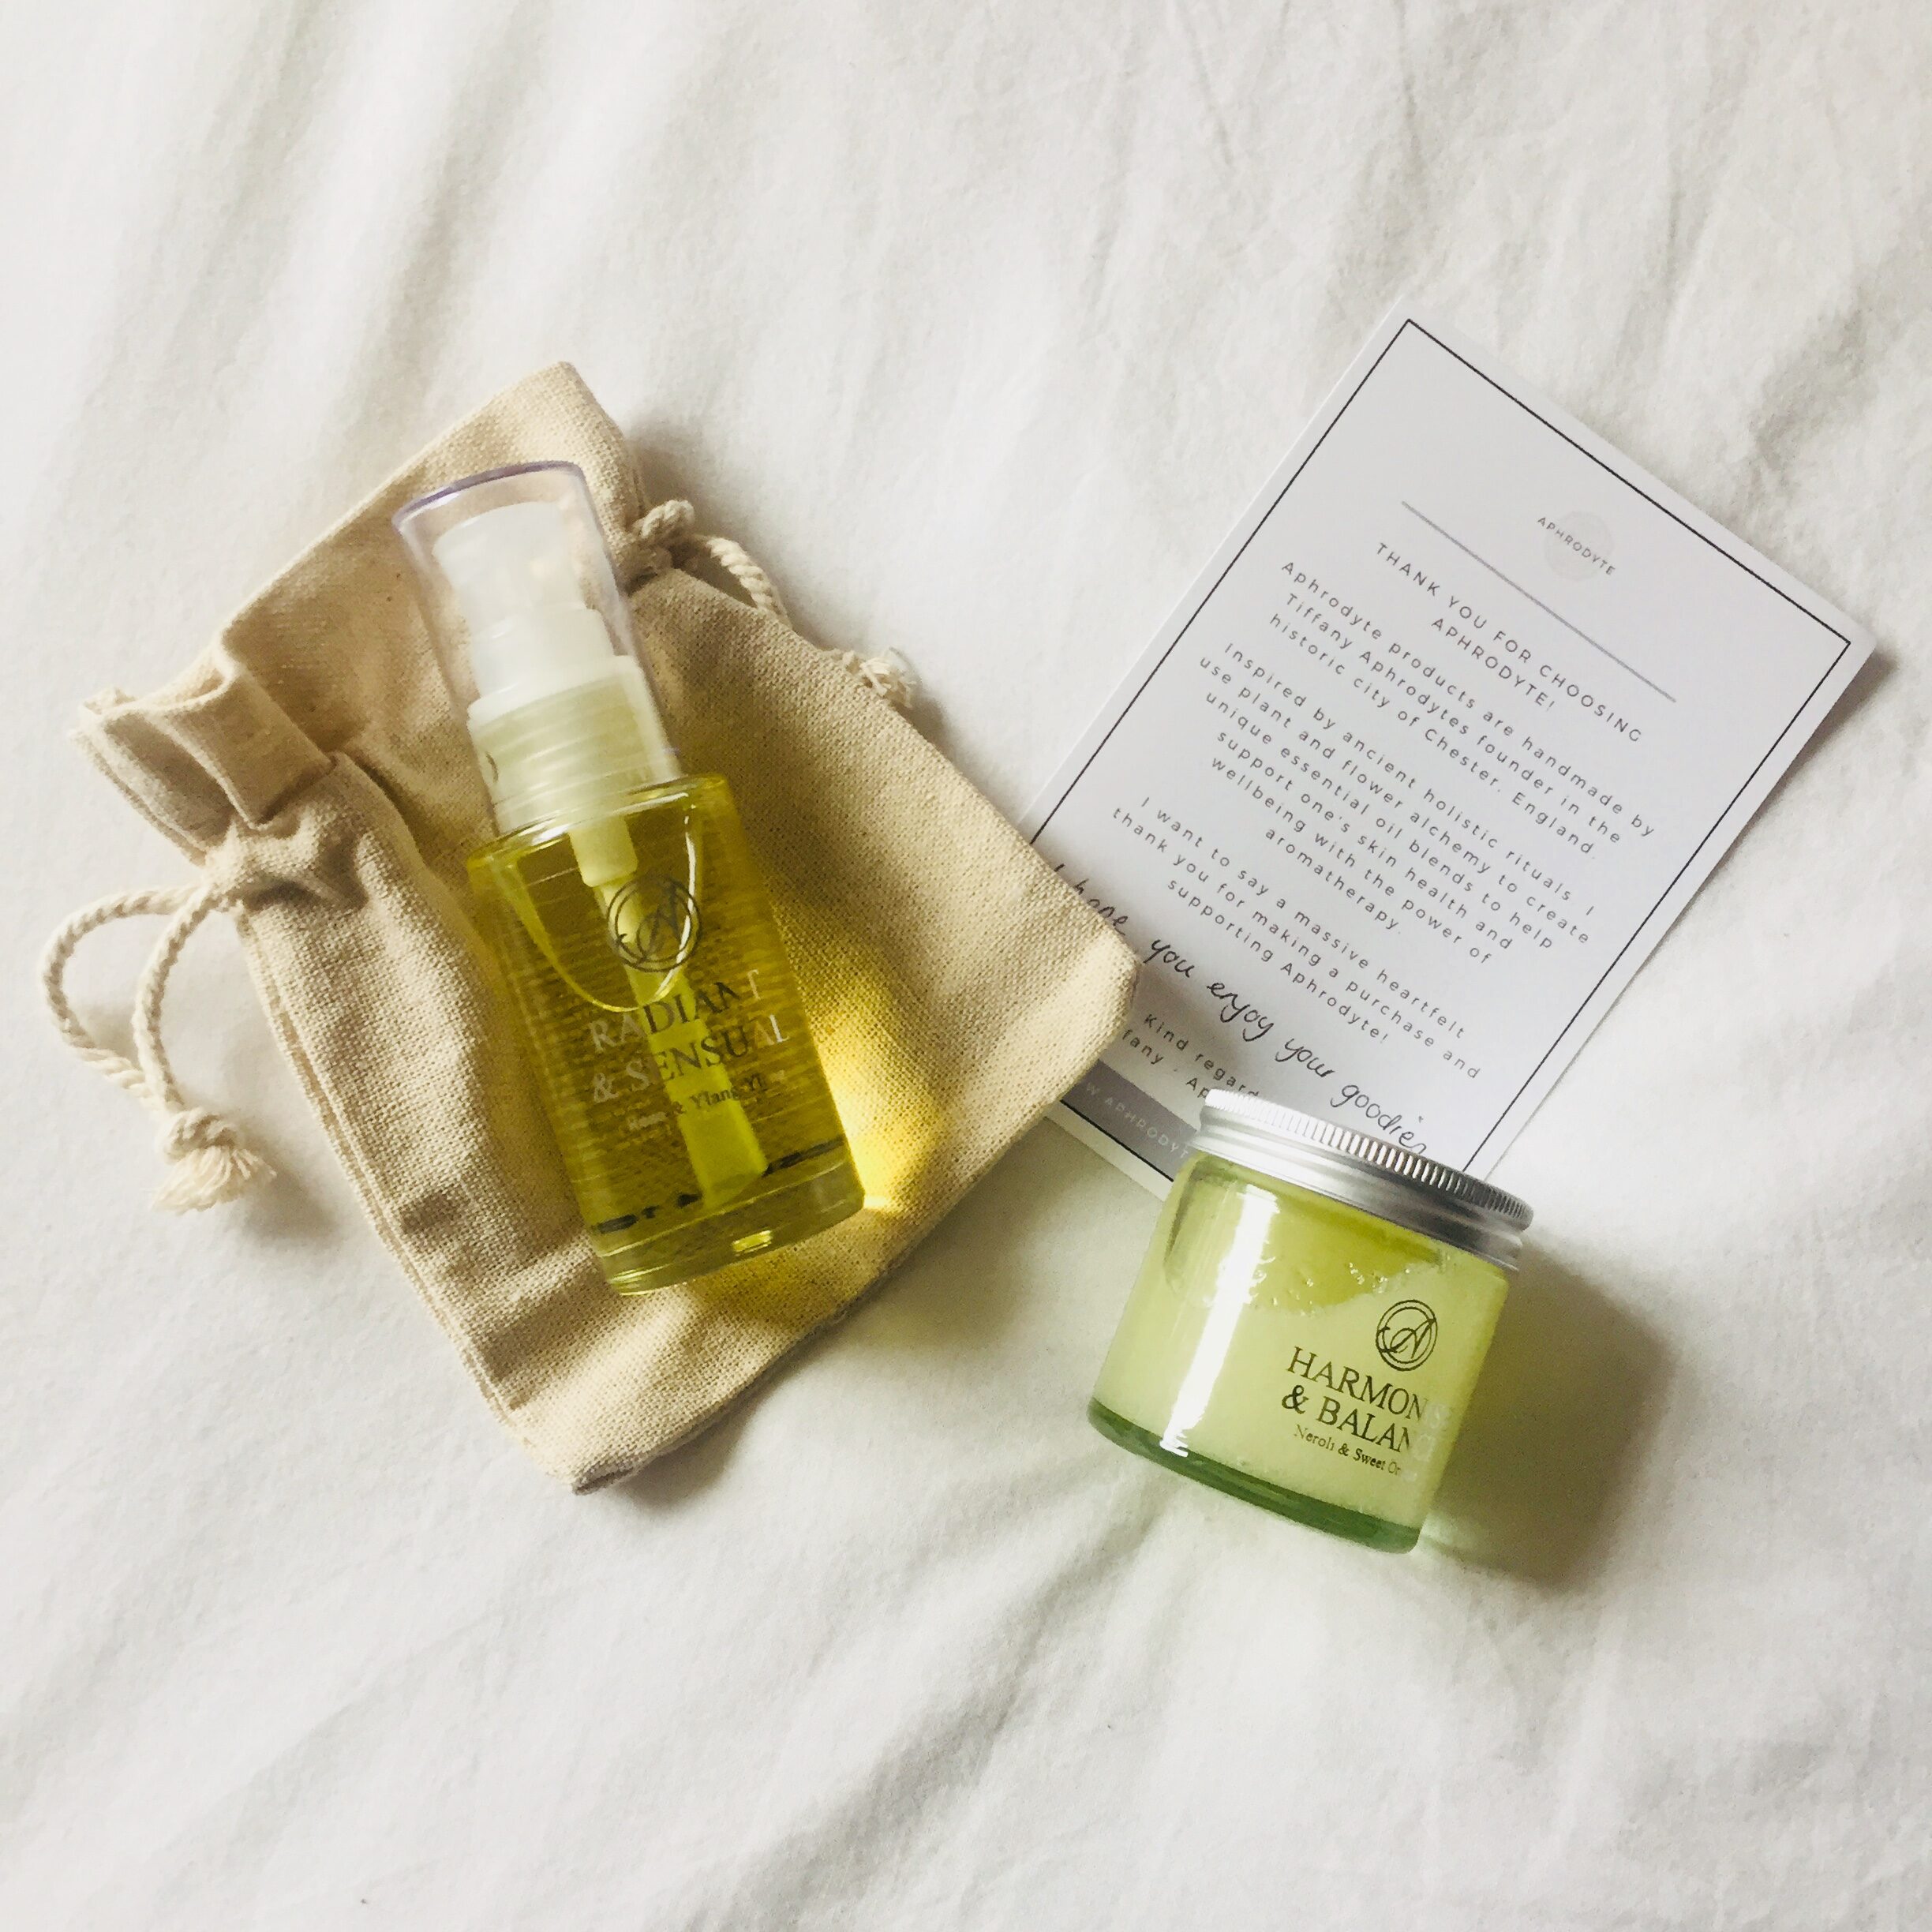 natural body oil and scrub from a ethical and sustainable UK brand, offering a spa day at home experience